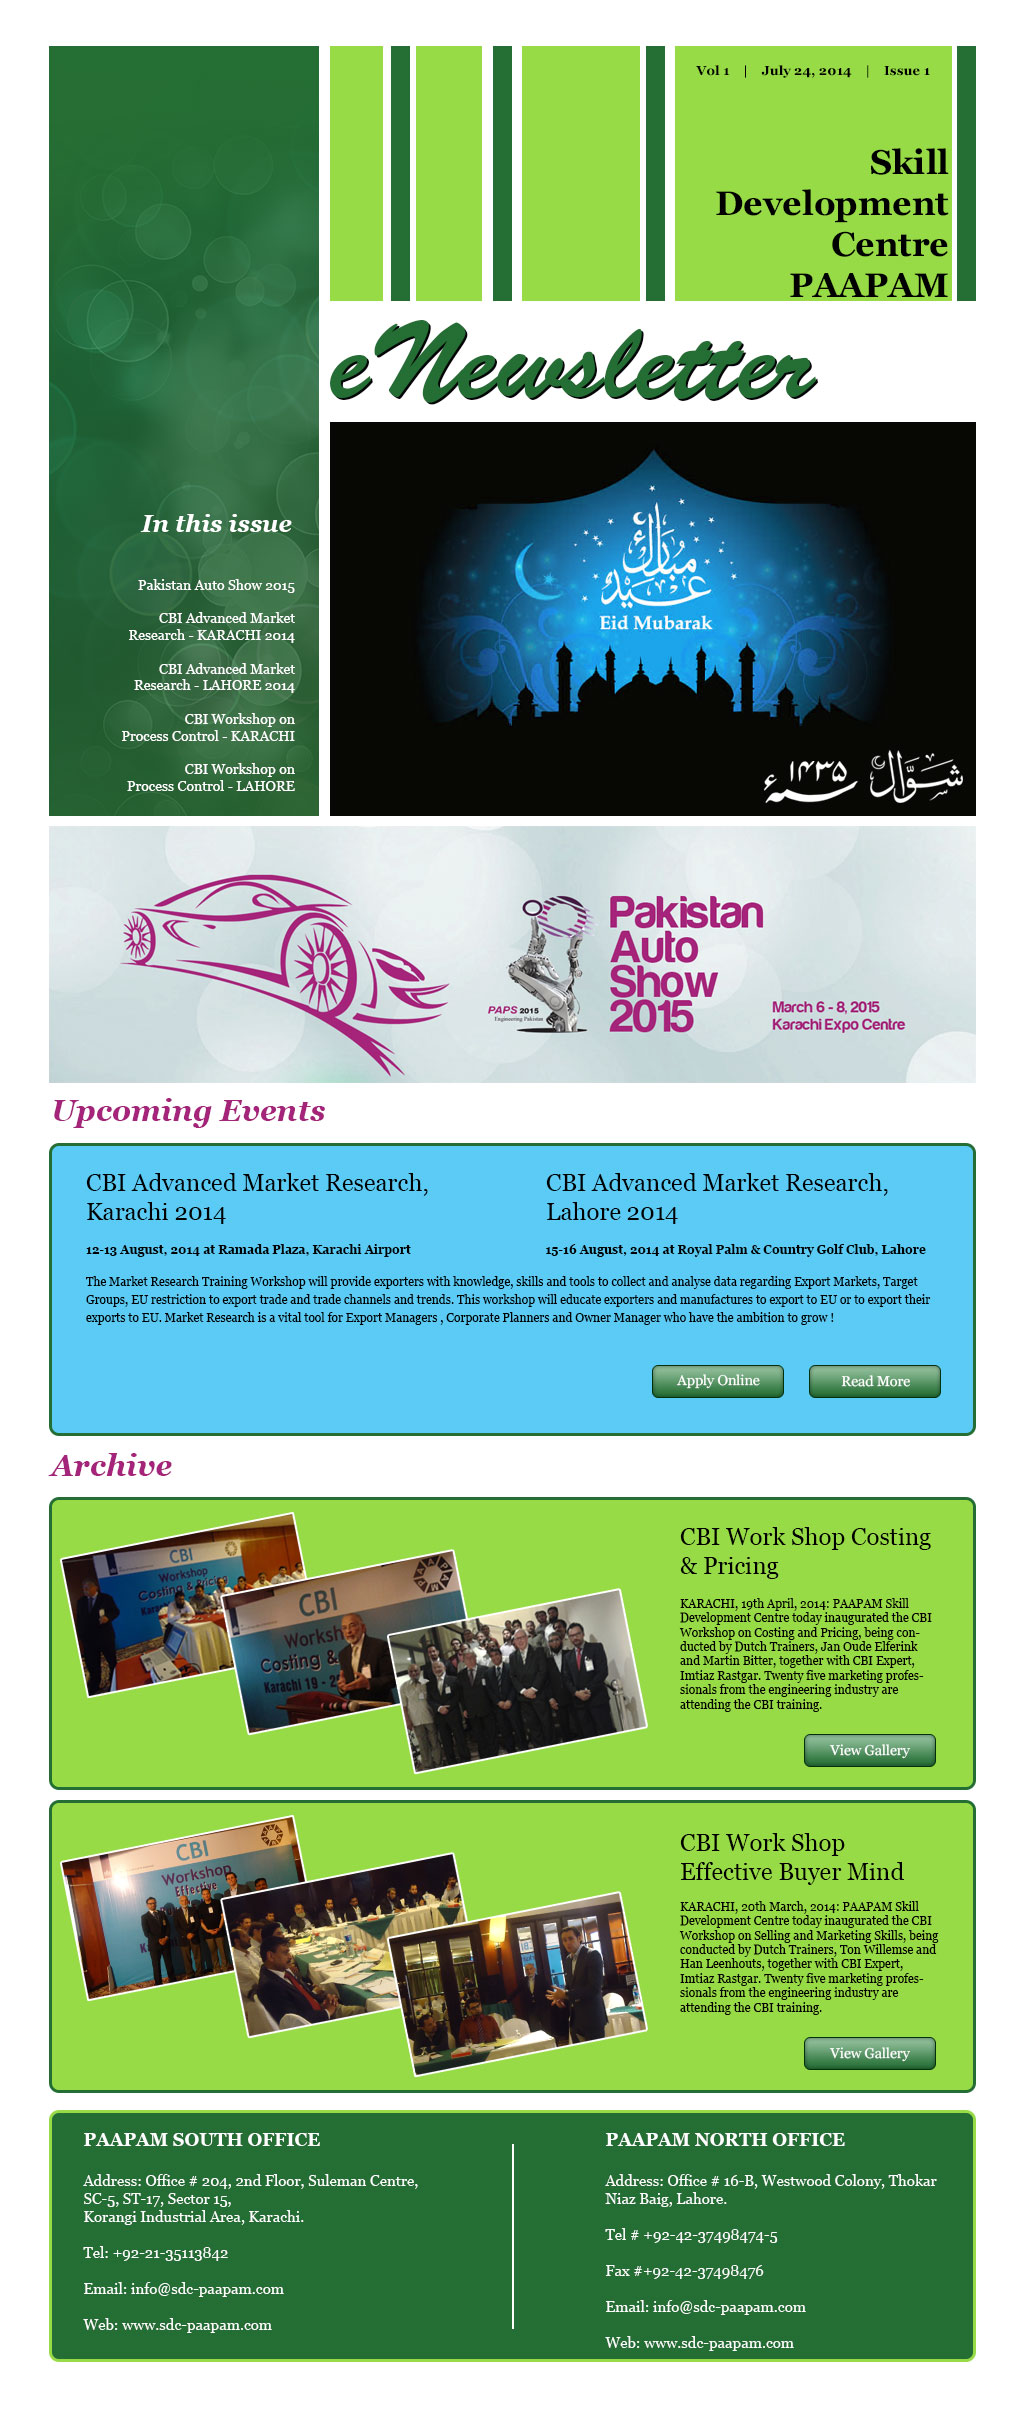 SDC PAAPAM eNewsletter, Issue 1